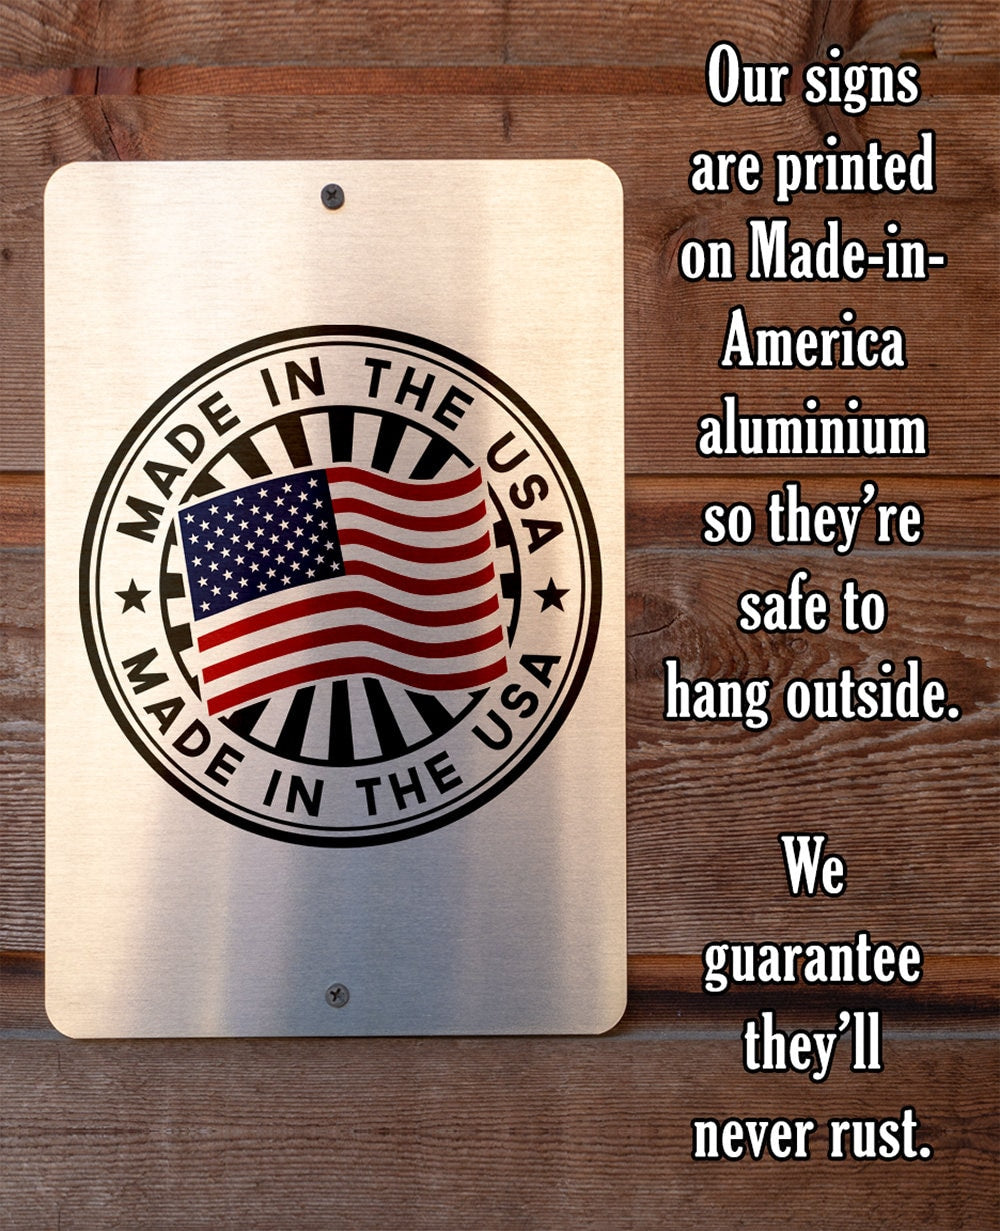 Try That in a Small Town-Durable Metal Sign - 8" x 12" or 12" x 18" Aluminum Tin Awesome Metal Poster